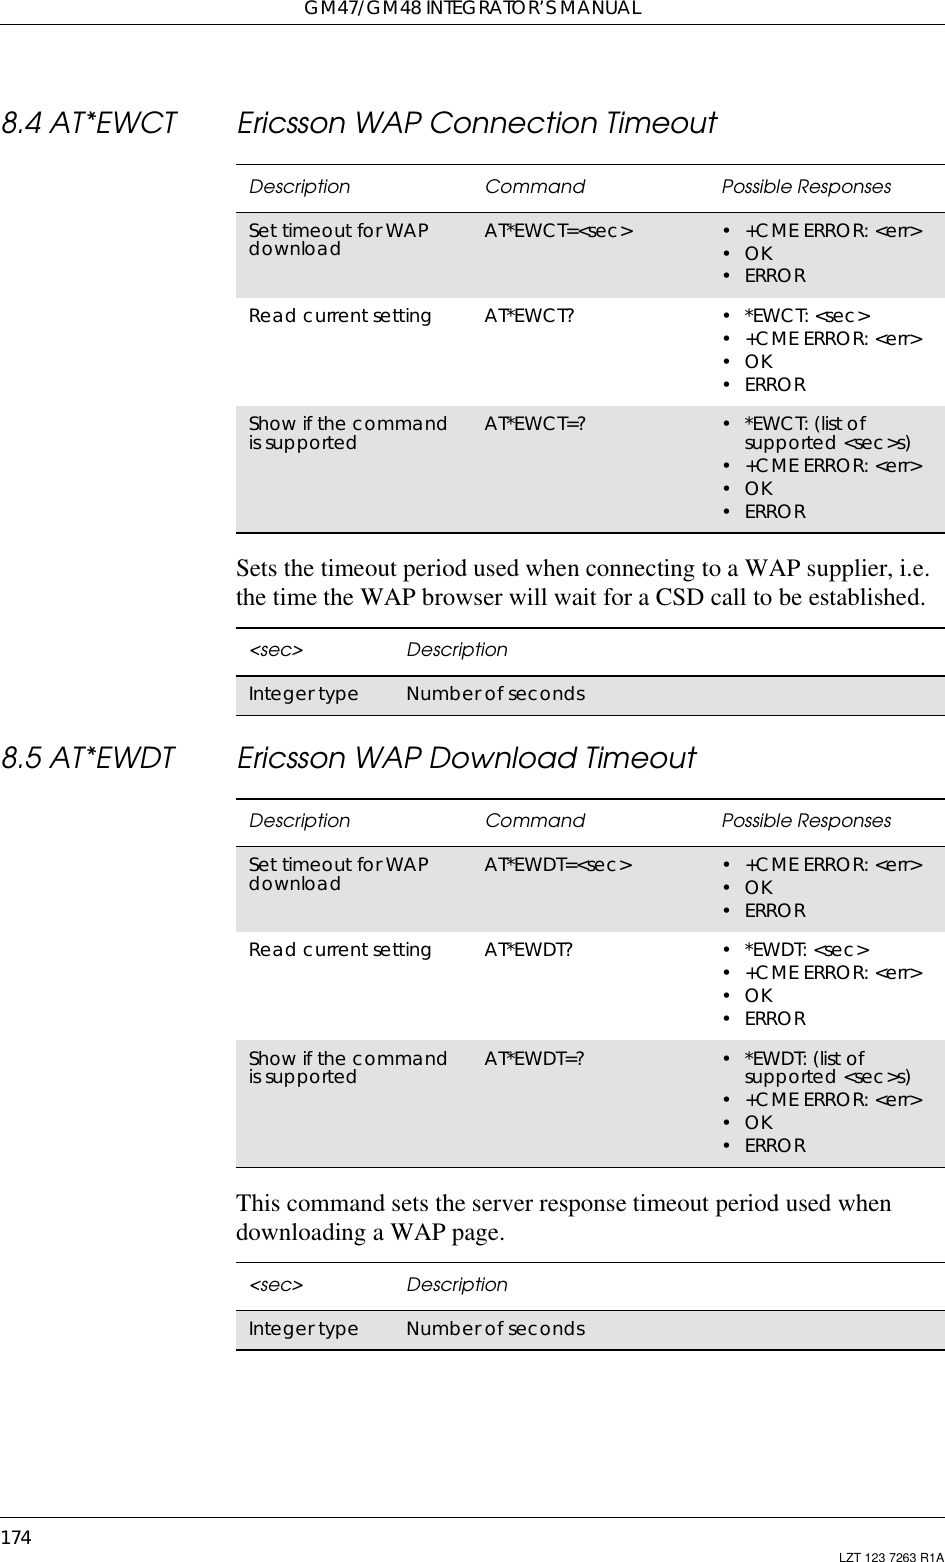 GM47/GM48 INTEGRATOR’S MANUAL174 LZT 123 7263 R1A8.4 AT*EWCT Ericsson WAP Connection TimeoutSets the timeout period used when connecting to a WAP supplier, i.e.the time the WAP browser will wait for a CSD call to be established.8.5 AT*EWDT Ericsson WAP Download TimeoutThis command sets the server response timeout period used whendownloading a WAP page.Description Command Possible ResponsesSet timeout for WAPdownload AT*EWCT=&lt;sec&gt; •+CMEERROR:&lt;err&gt;•OK•ERRORRead current setting AT*EWCT? •*EWCT:&lt;sec&gt;•+CMEERROR:&lt;err&gt;•OK•ERRORShow if the commandis supported AT*EWCT=? • *EWCT: (list ofsupported &lt;sec&gt;s)•+CMEERROR:&lt;err&gt;•OK•ERROR&lt;sec&gt; DescriptionInteger type Number of secondsDescription Command Possible ResponsesSet timeout for WAPdownload AT*EWDT=&lt;sec&gt; •+CMEERROR:&lt;err&gt;•OK•ERRORRead current setting AT*EWDT? •*EWDT:&lt;sec&gt;•+CMEERROR:&lt;err&gt;•OK•ERRORShow if the commandis supported AT*EWDT=? •*EWDT:(listofsupported &lt;sec&gt;s)•+CMEERROR:&lt;err&gt;•OK•ERROR&lt;sec&gt; DescriptionInteger type Number of seconds